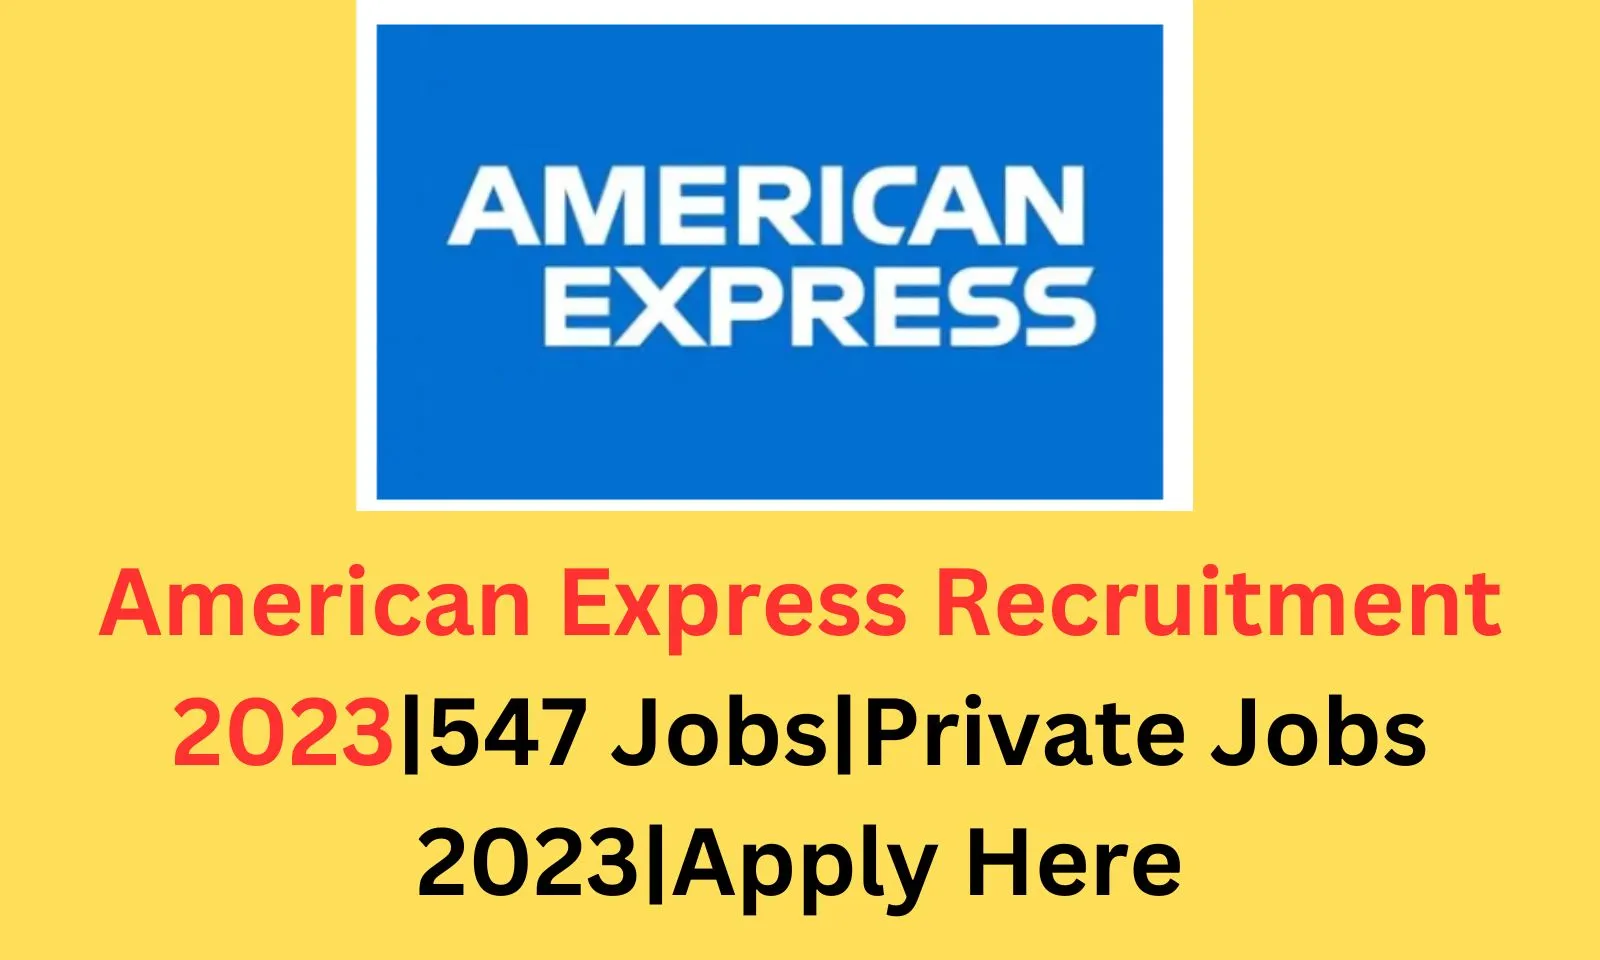 American Express Recruitment 2023|547 Jobs |Private Jobs 2023:: The dream of getting a job in American Express came true, recruitment on these posts?